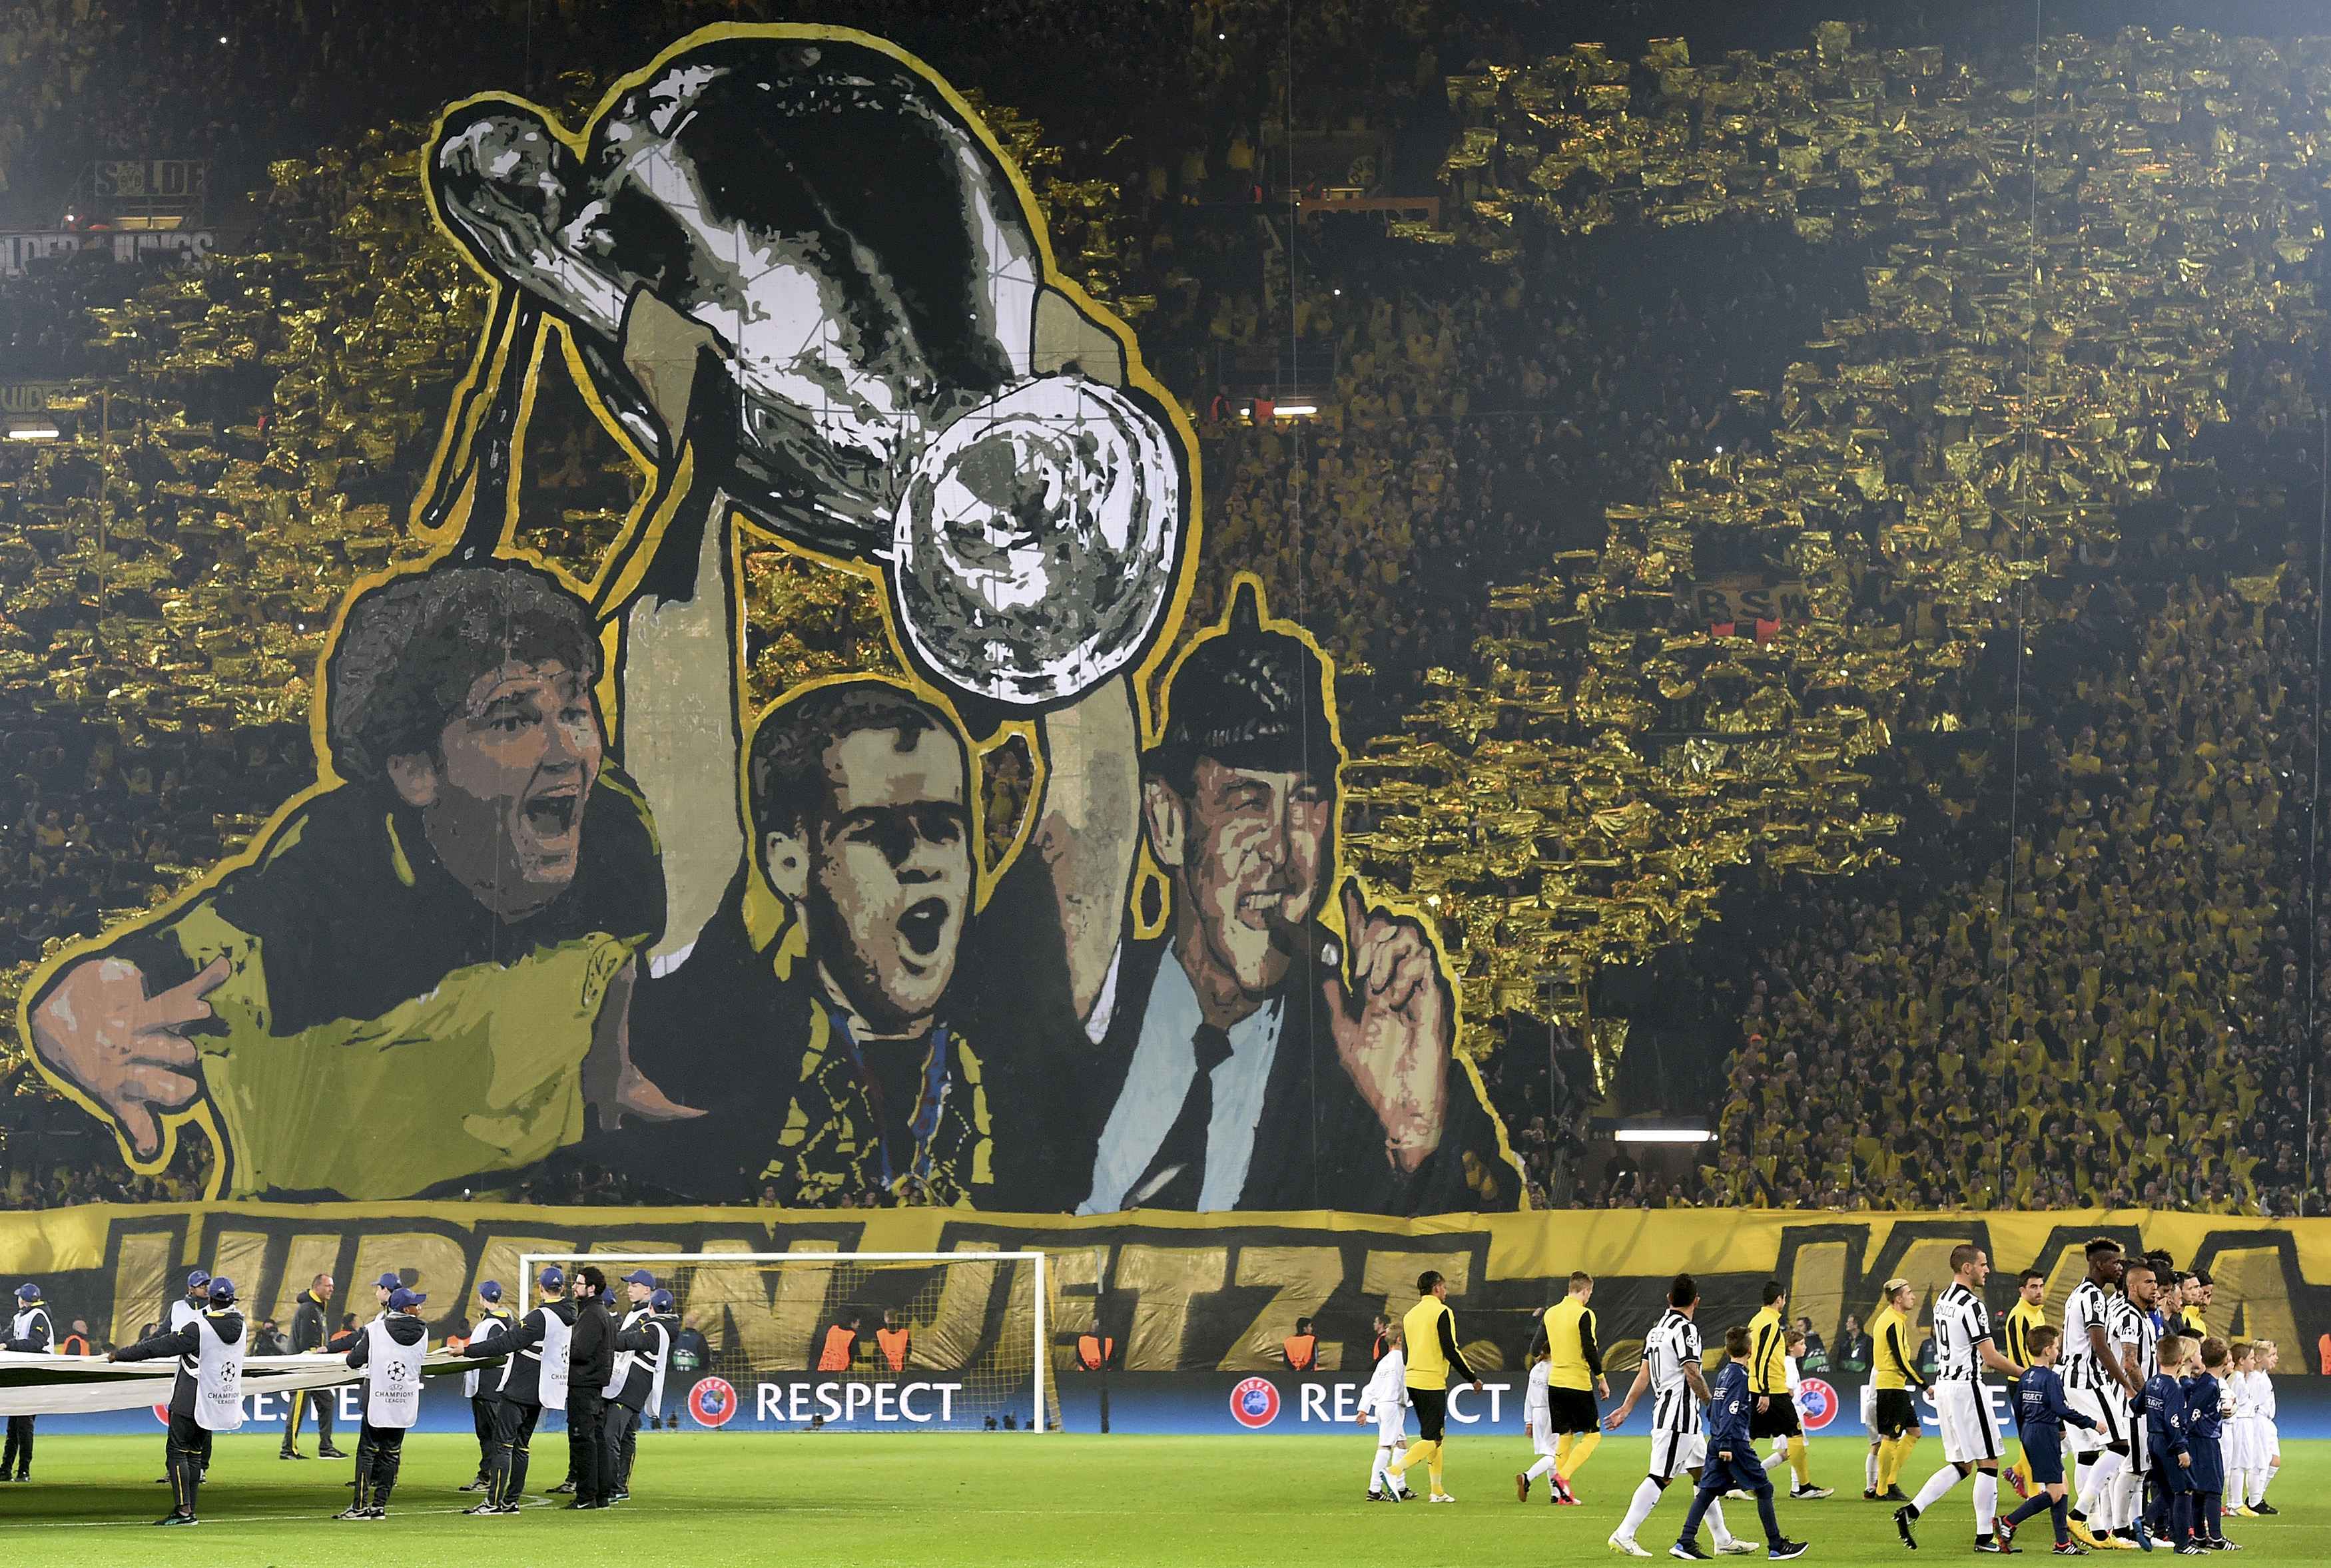 A giant banner depicting key players in Borussia Dormund's victory in the Champions League final against Juventus in 1997, is unfurled just before kick-off of the Champions League round of 16 second leg soccer match between Borussia Dortmund and Juventus in Dortmund March 18, 2015. Picture taken March 18. REUTERS/Fabian Bimmer